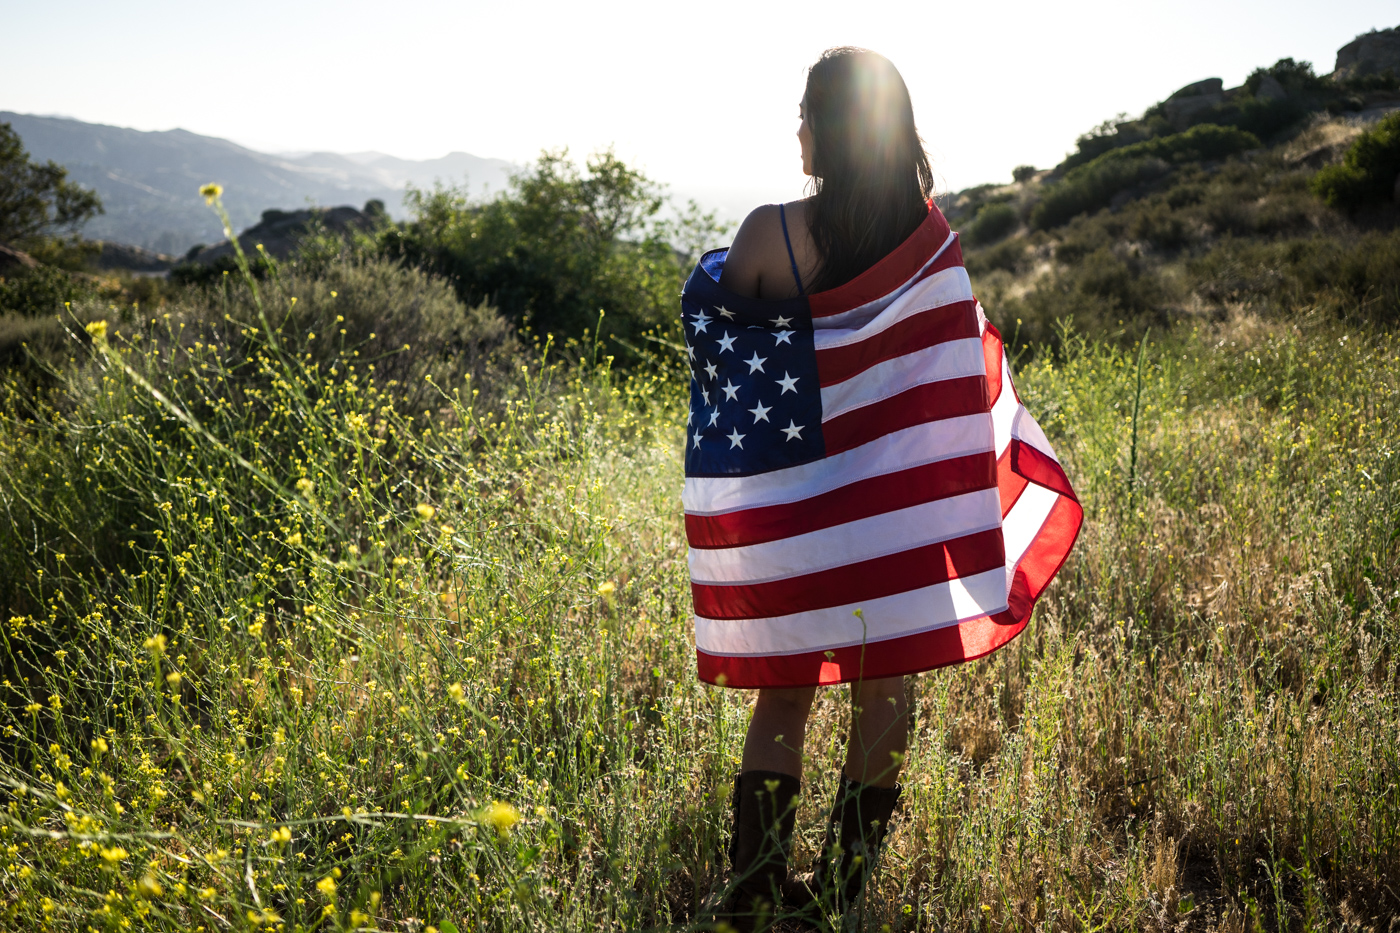 American woman with flag portrait in grassy mountain landscape at sunset